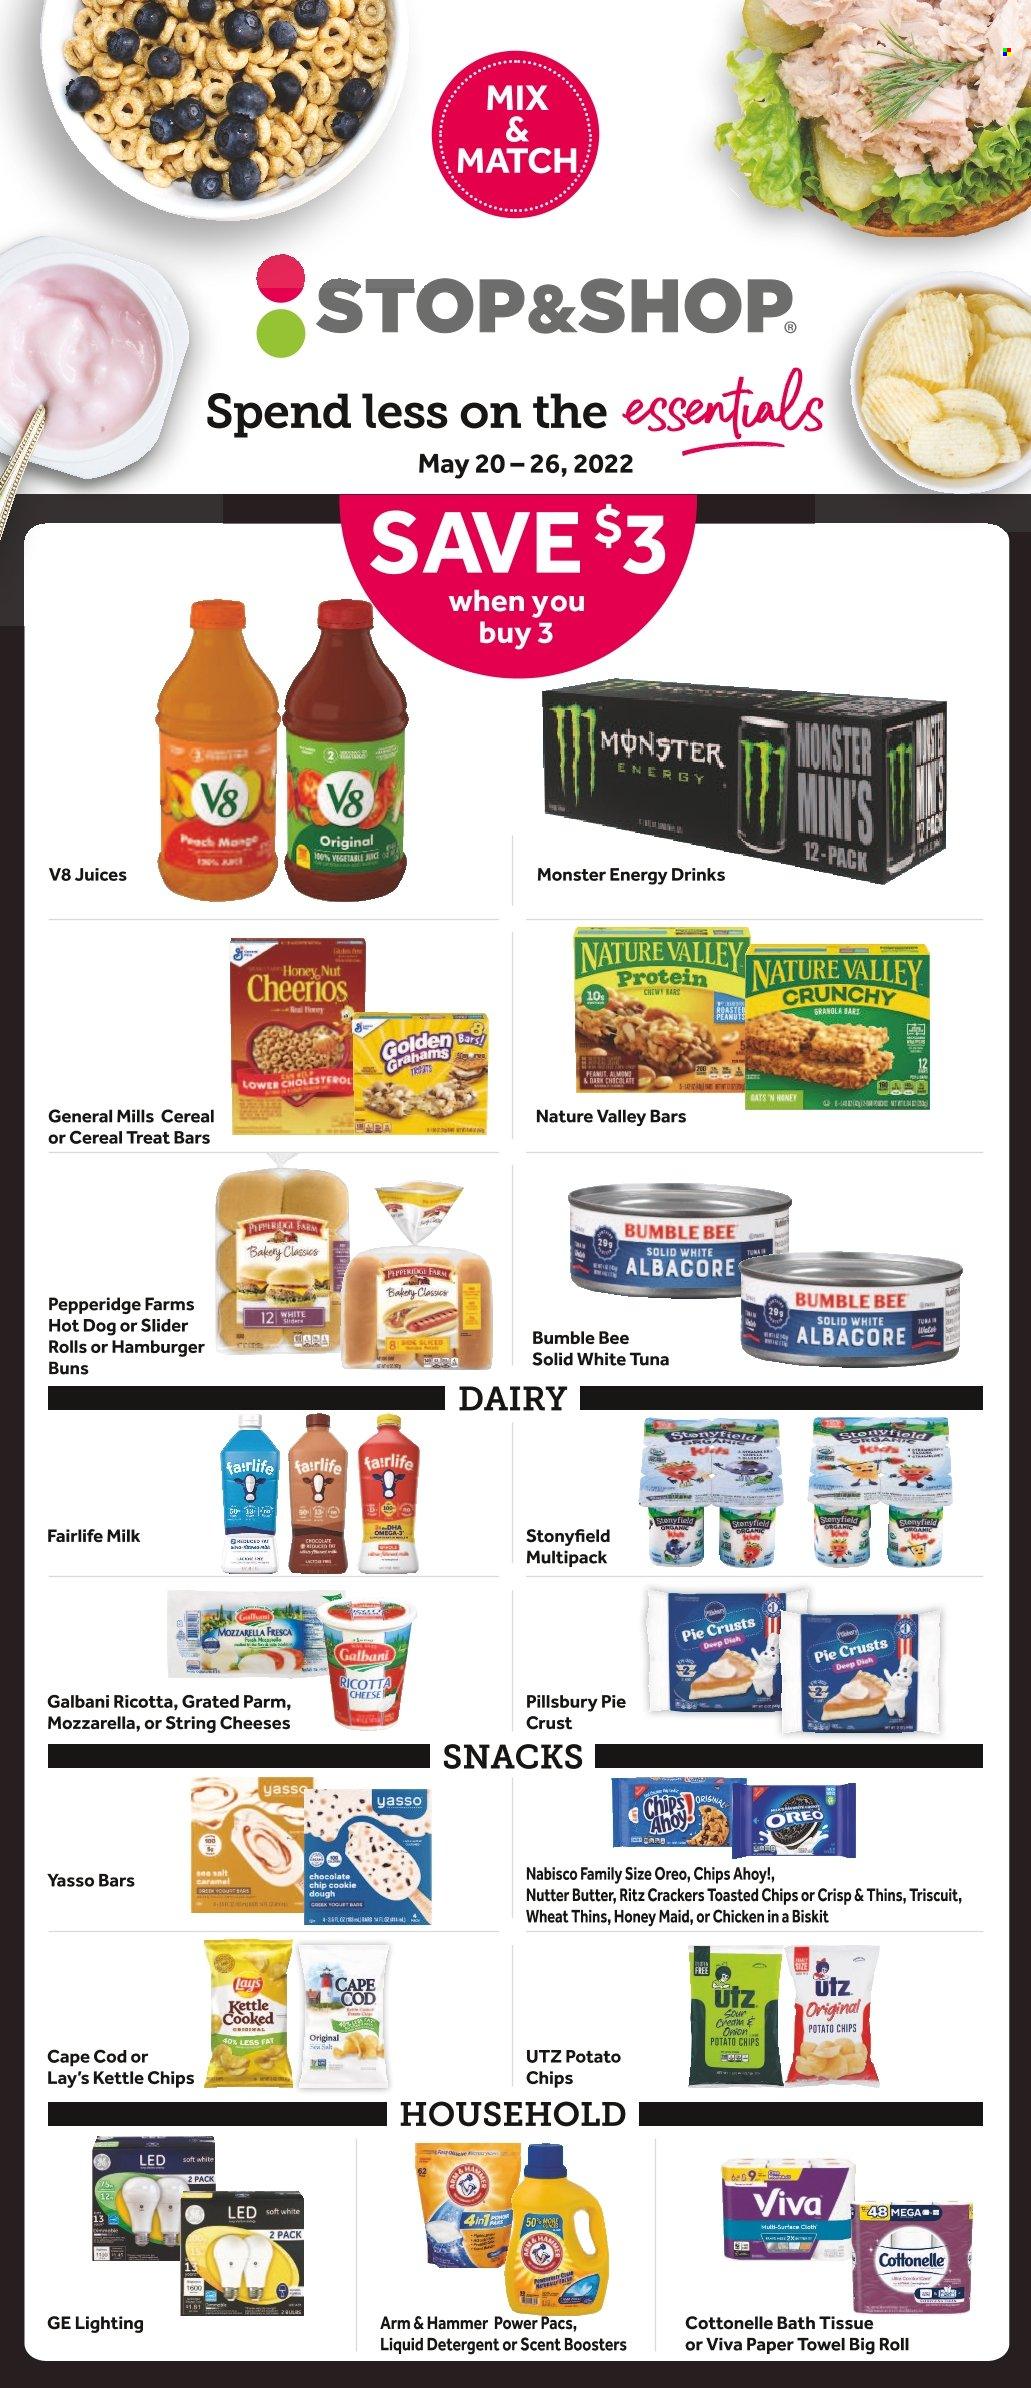 thumbnail - Stop & Shop Flyer - 05/20/2022 - 05/26/2022 - Sales products - buns, hamburger, cod, tuna, hot dog, Bumble Bee, Pillsbury, mozzarella, ricotta, cheese, Galbani, Oreo, milk, butter, chocolate, snack, crackers, Chips Ahoy!, RITZ, potato chips, chips, Lay’s, Thins, ARM & HAMMER, pie crust, granola, Cheerios, Honey Maid, Nature Valley, juice, energy drink, Monster, Monster Energy, bath tissue, Cottonelle, paper towels, liquid detergent, scent booster. Page 6.